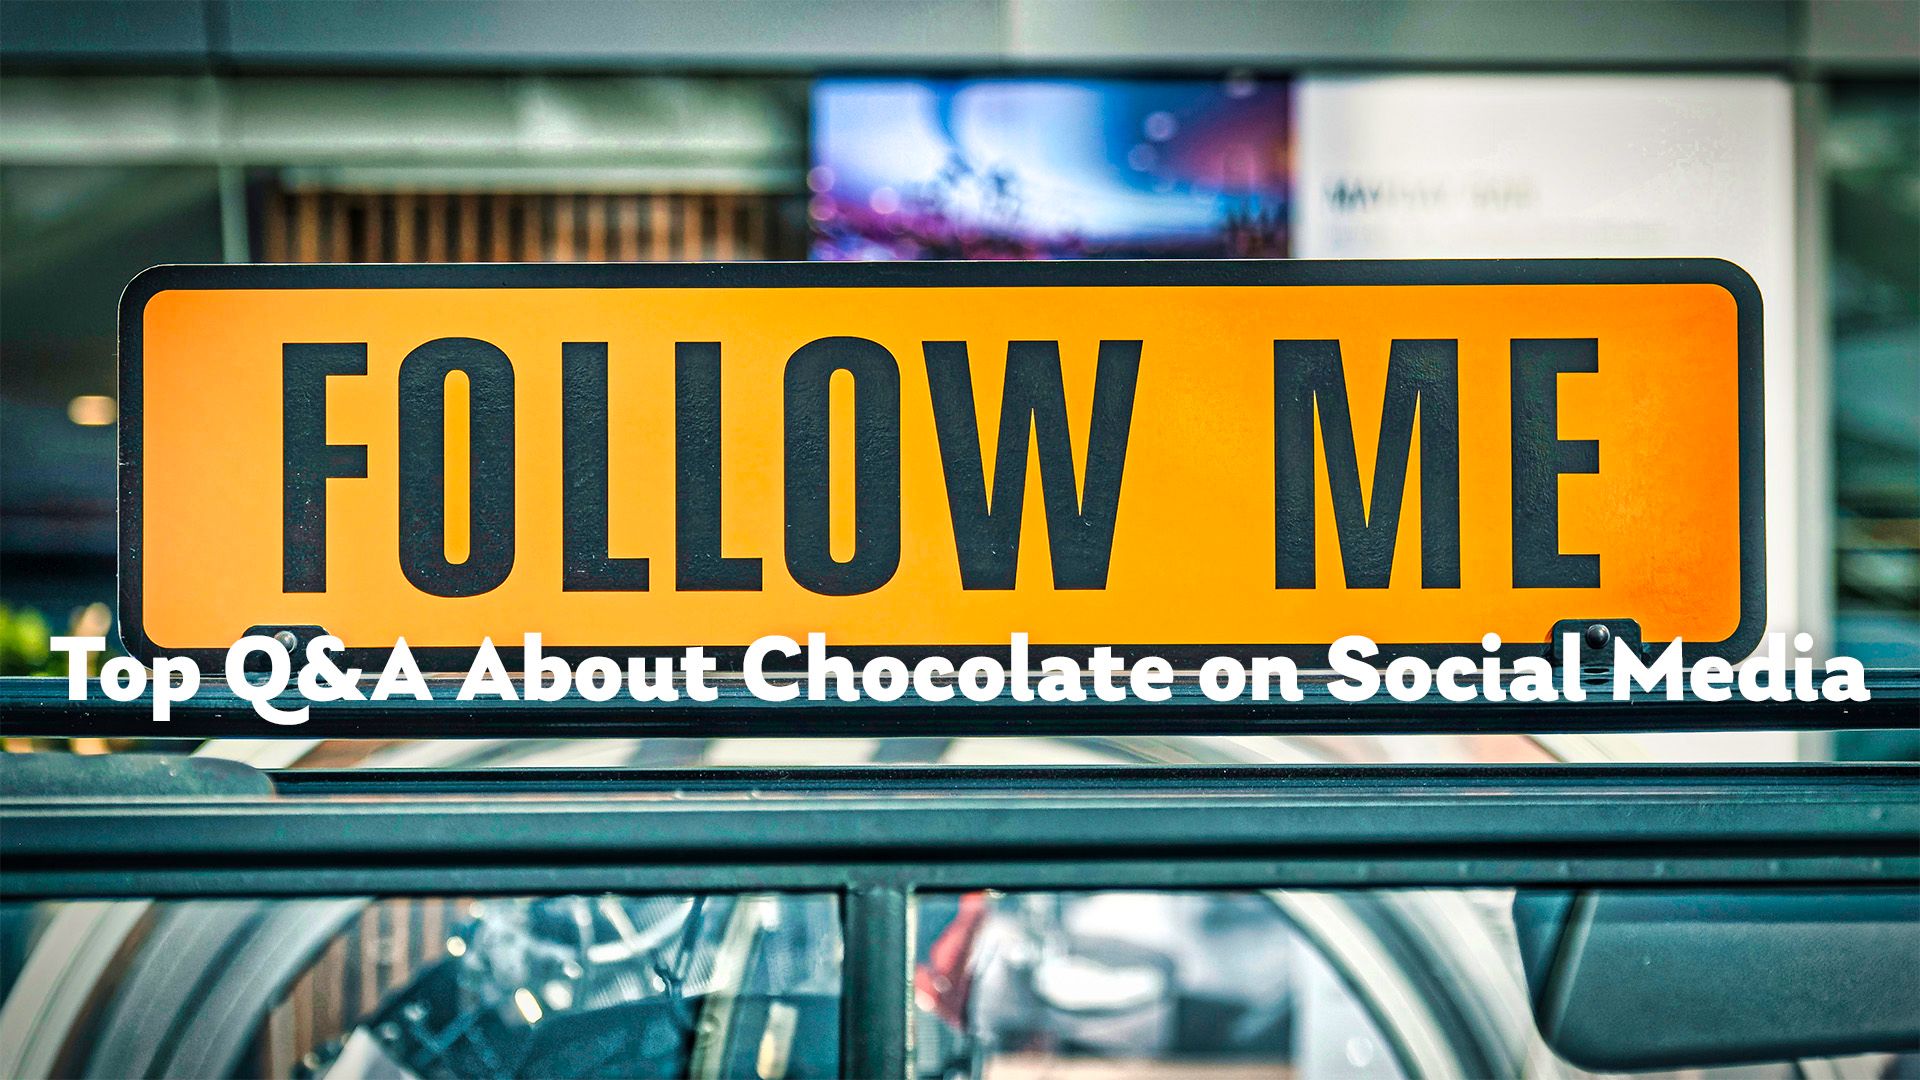 TheChocolateLife::LIVE – Top Q&A About Chocolate on Social Media